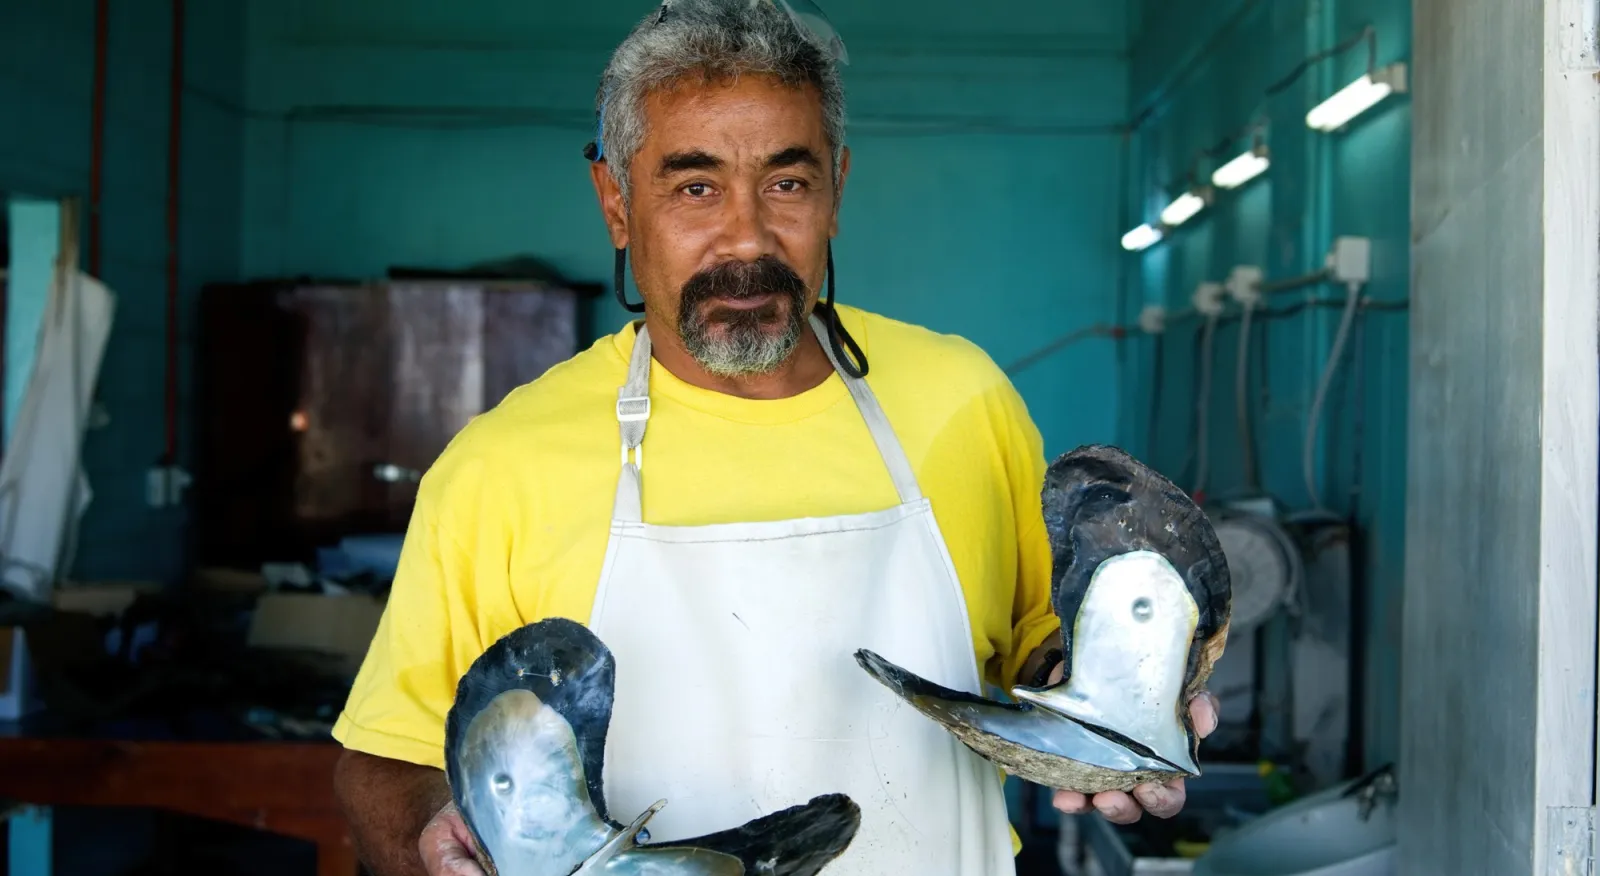 A man in a yellow t-shirt and an apron hold two very large shells in his hands. He makes eye contact with the camera as he shows them off.